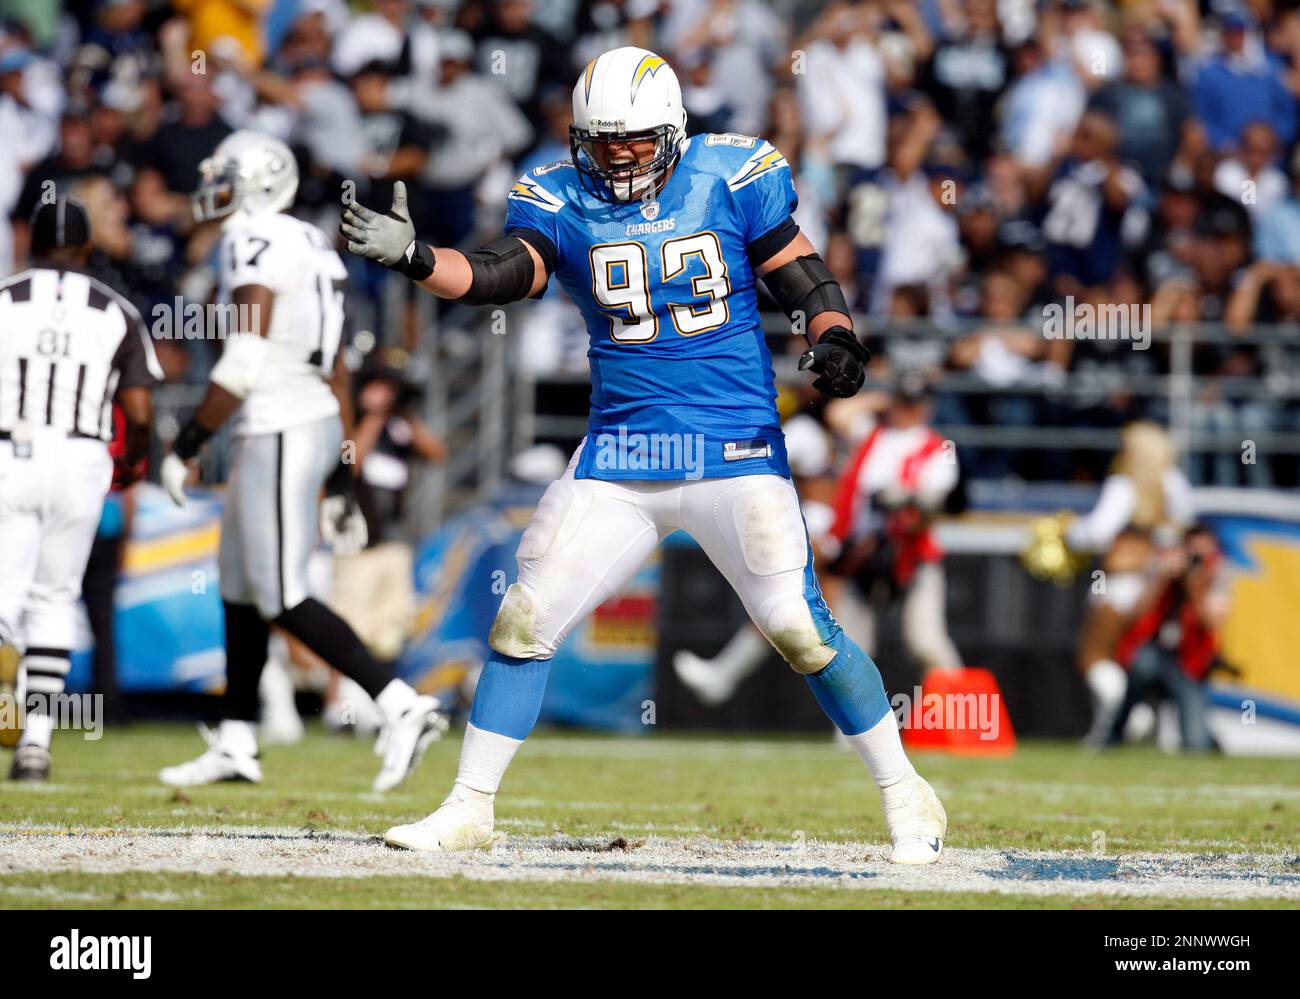 14 OCTOBER 2007: Luis Castillo of the San Diego Chargers during a